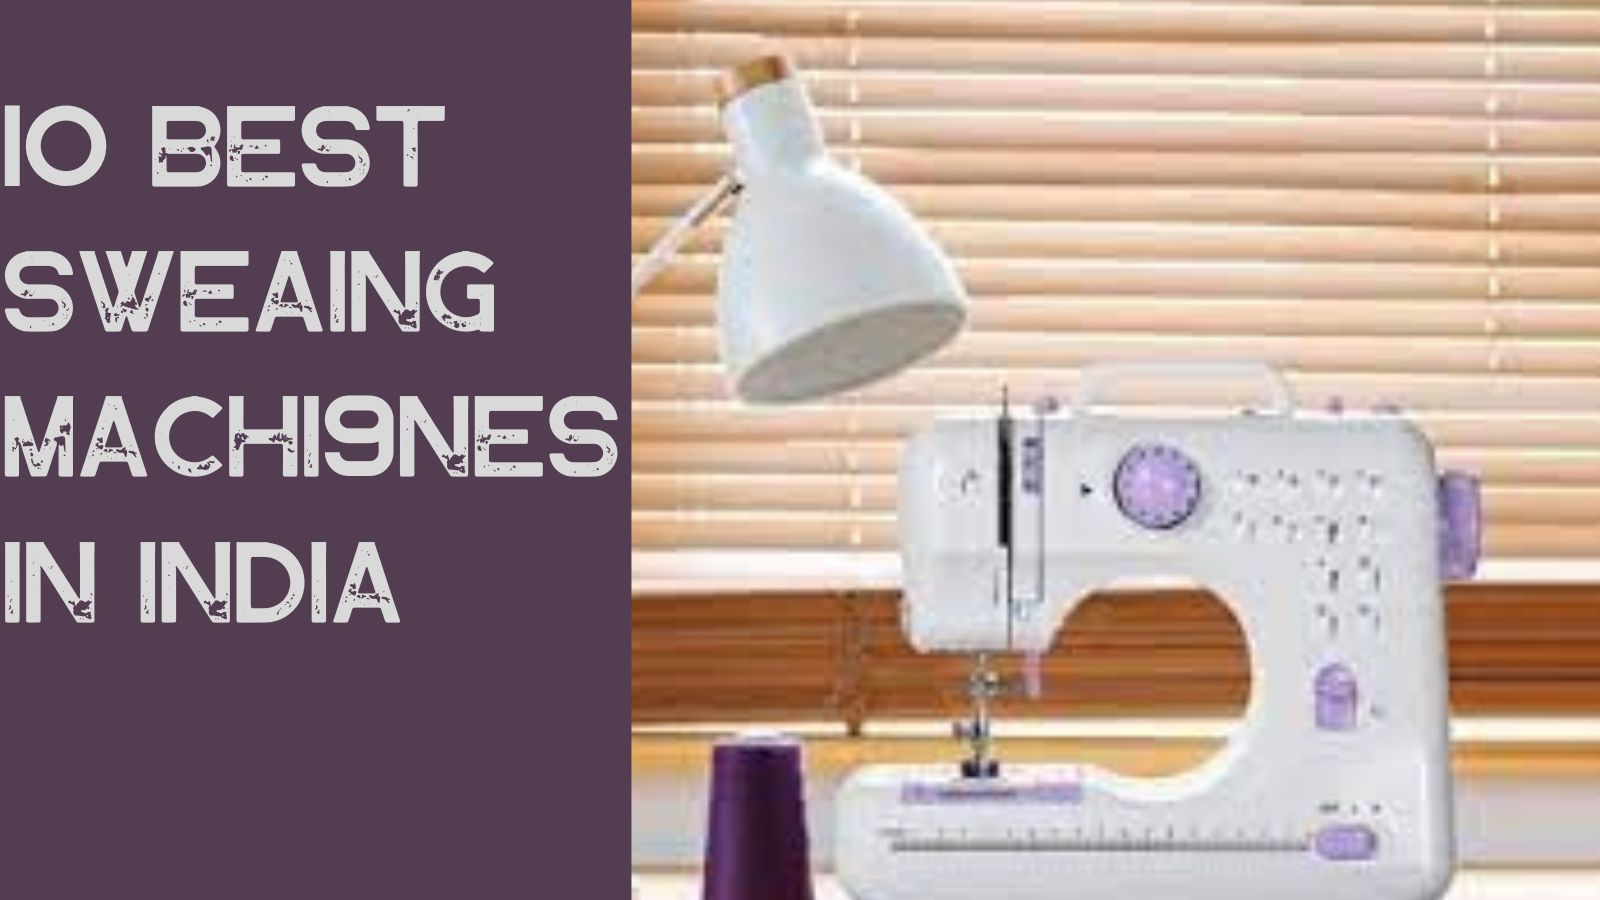 ­10 Best Sewing Machines In India